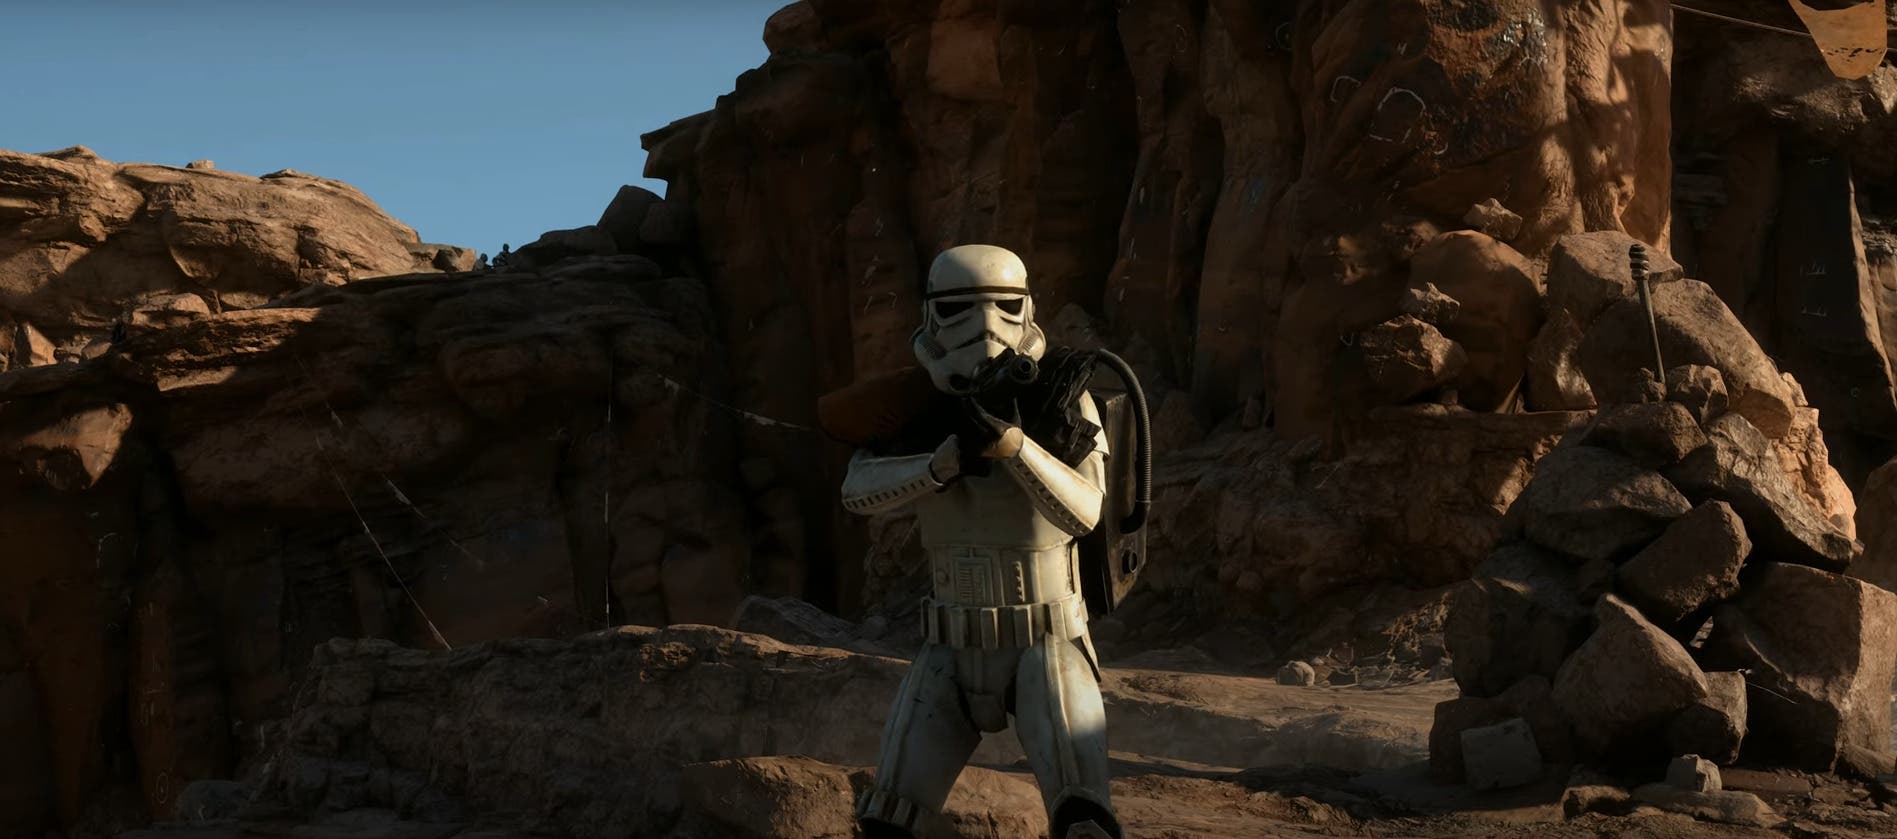 The Most Realistic Star Wars Video Game Ever: You won’t believe what Battlefront looks like in 8K and ray tracing.